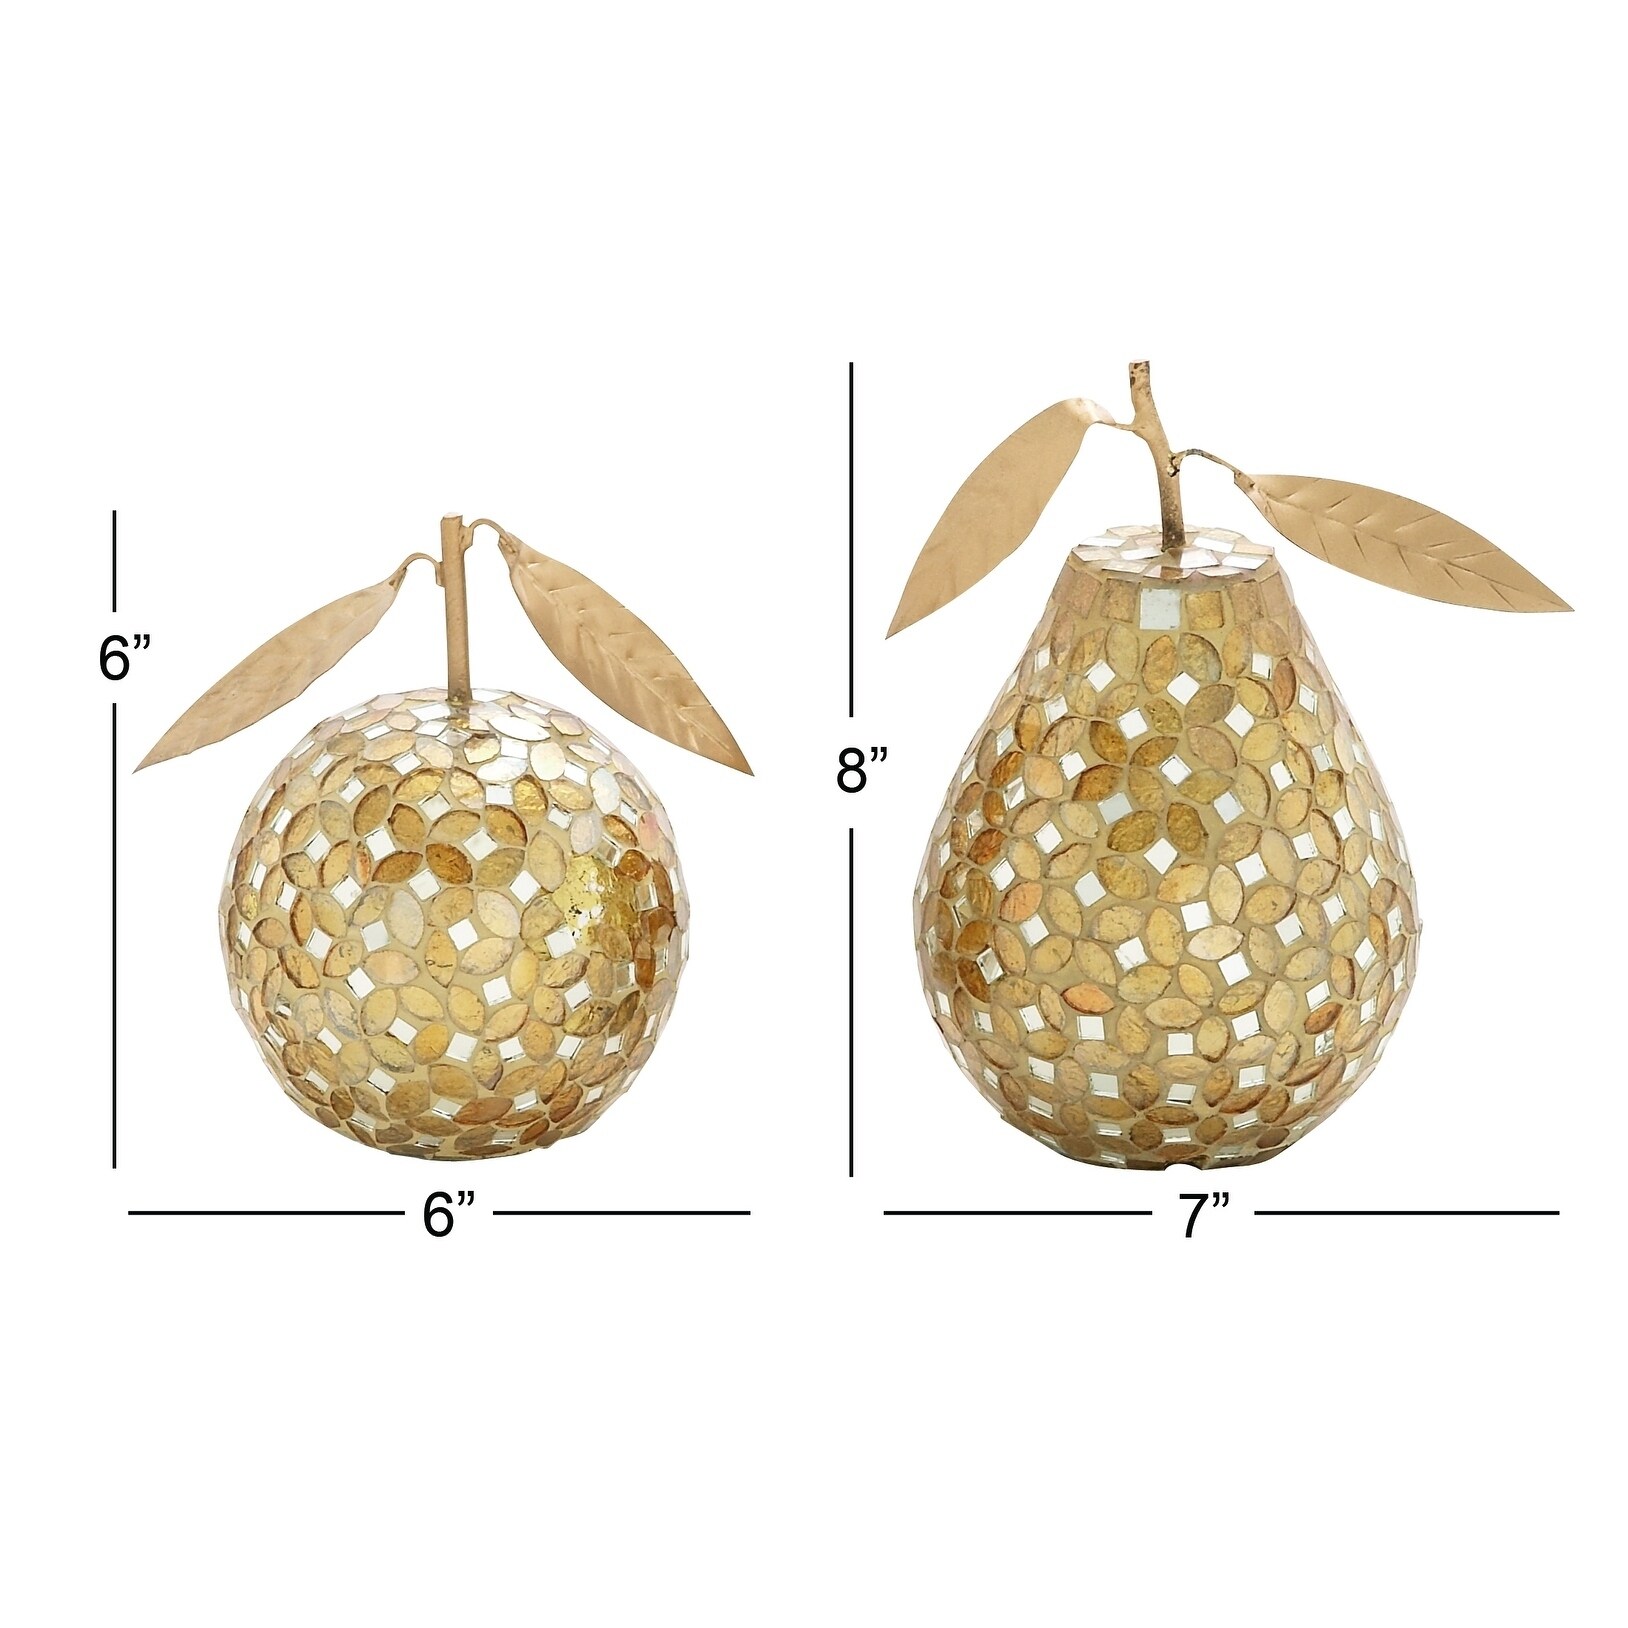 Gold Metal Decorative Fruit Sculpture with Mosaic Details (Set of 2) - 7 x 5.5 x 8 and 6 x 5 x 6